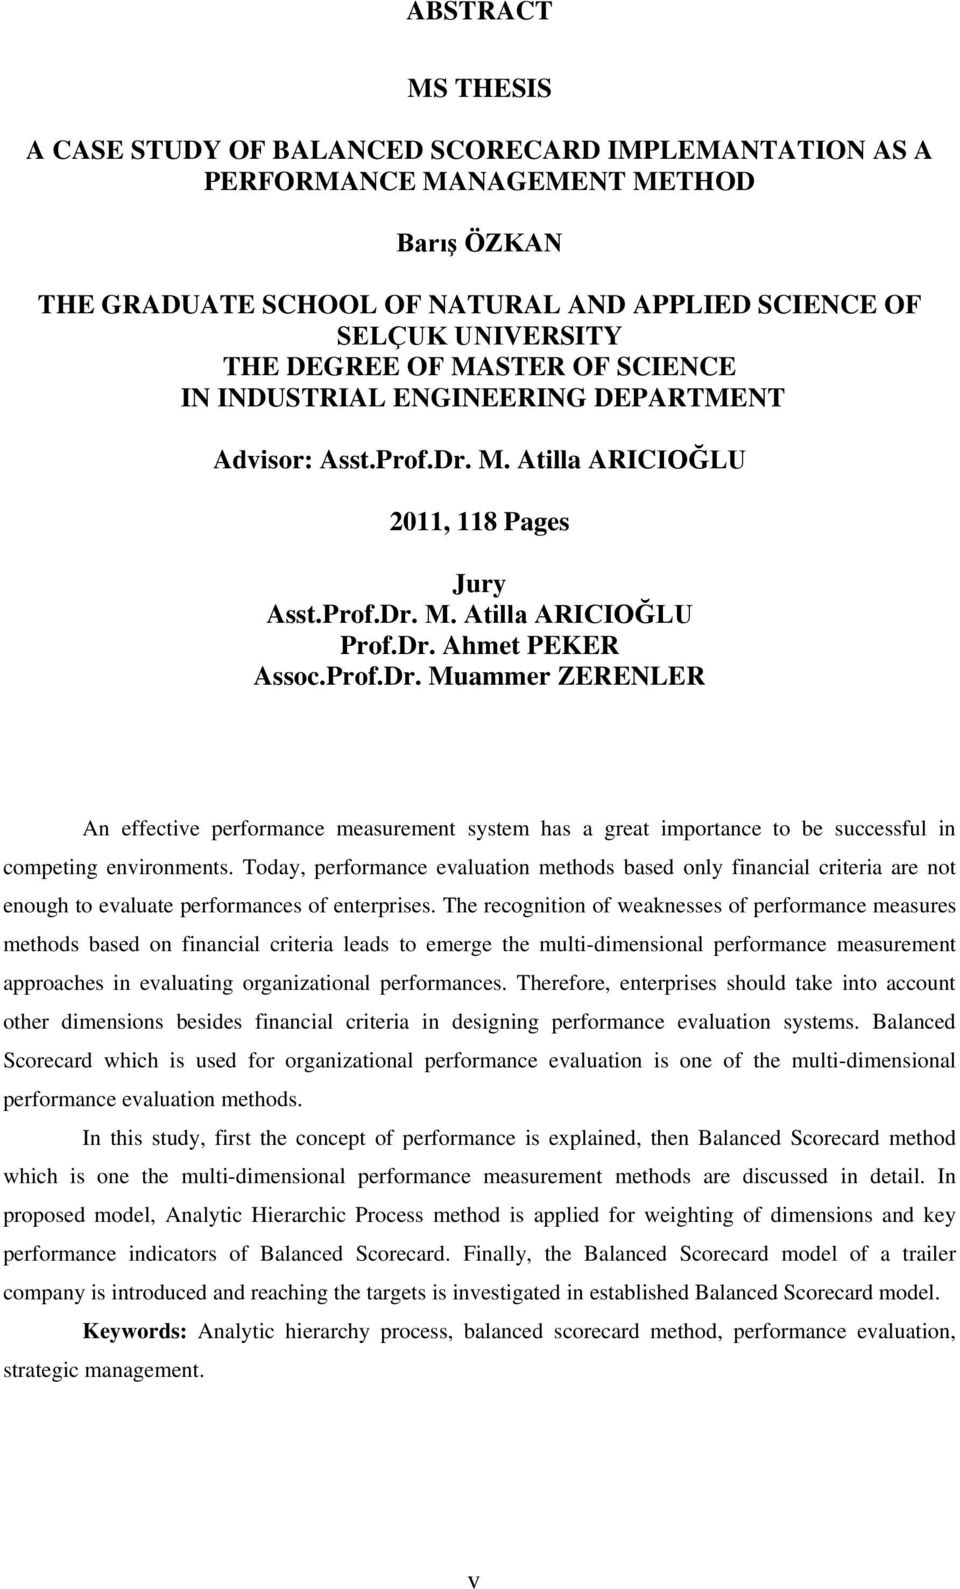 M. Atilla ARICIOĞLU 2011, 118 Pages Jury Asst.Prof.Dr. M. Atilla ARICIOĞLU Prof.Dr. Ahmet PEKER Assoc.Prof.Dr. Muammer ZERENLER An effective performance measurement system has a great importance to be successful in competing environments.